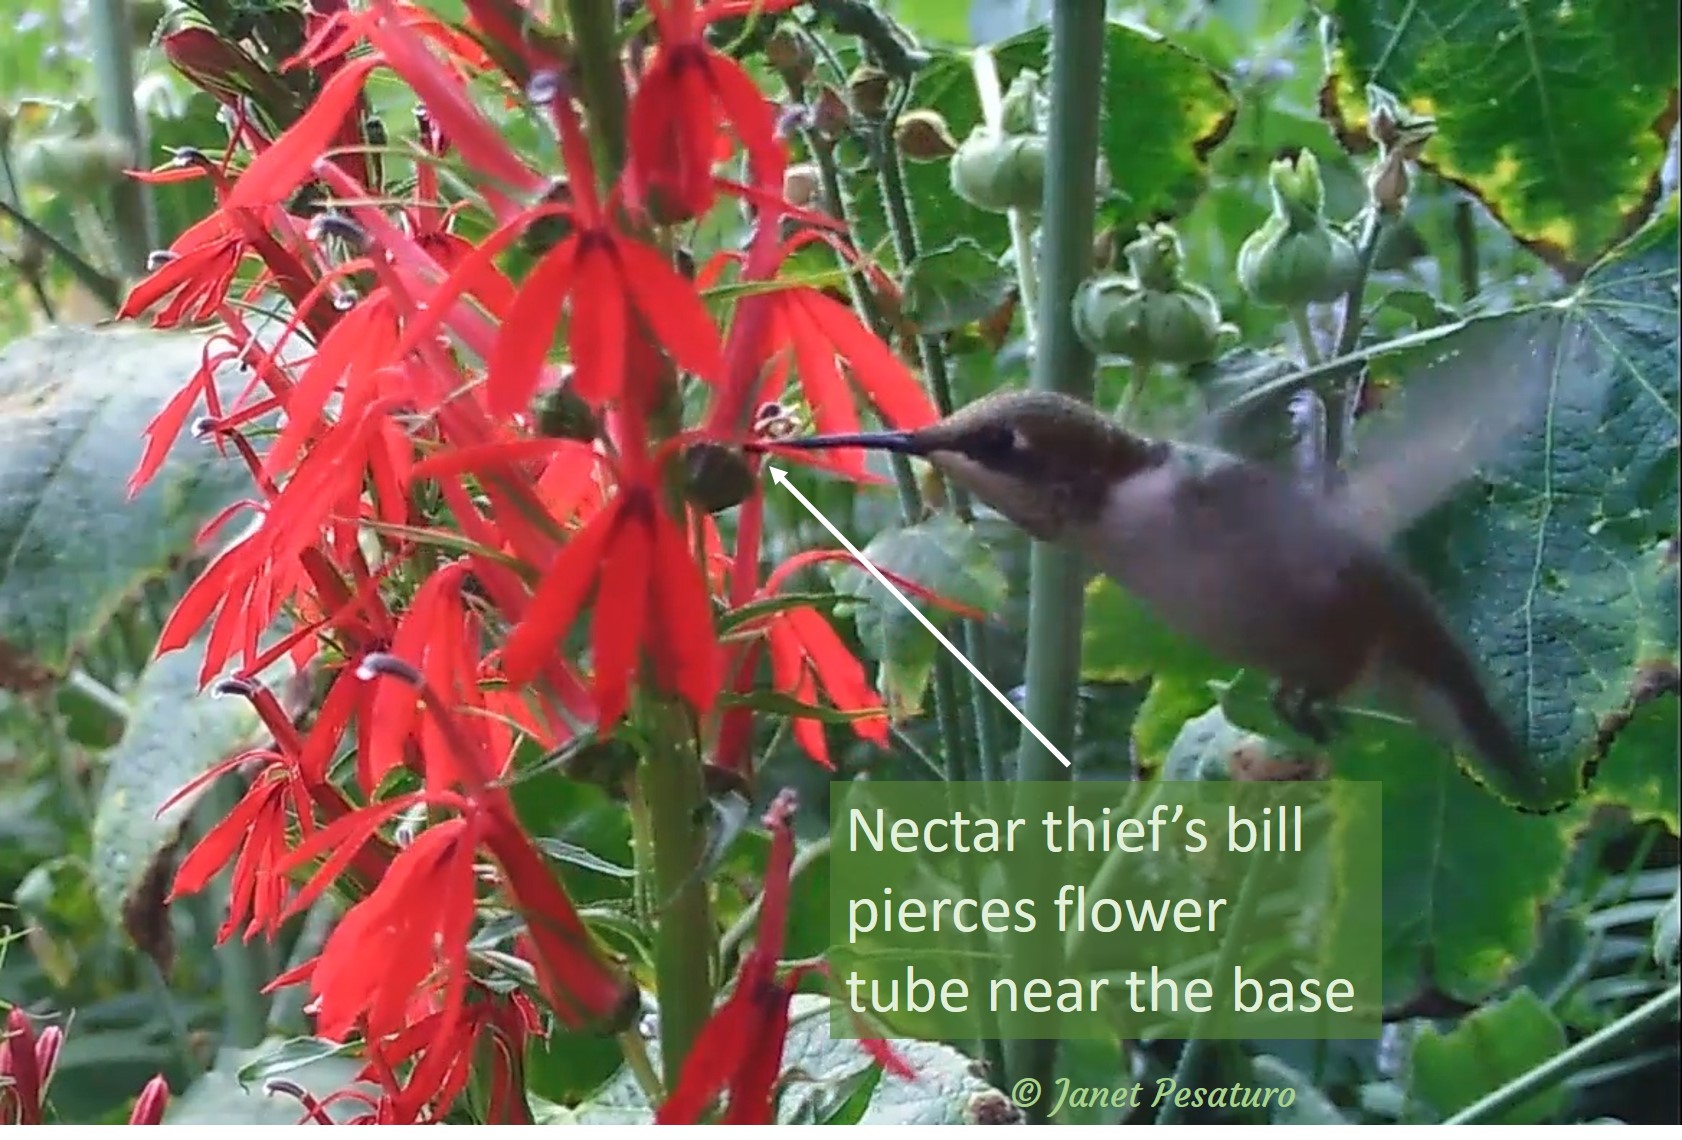 A rub-throated hummingbird thief at cardinal flower. The bird pierces the base of the flower tube with its bill.